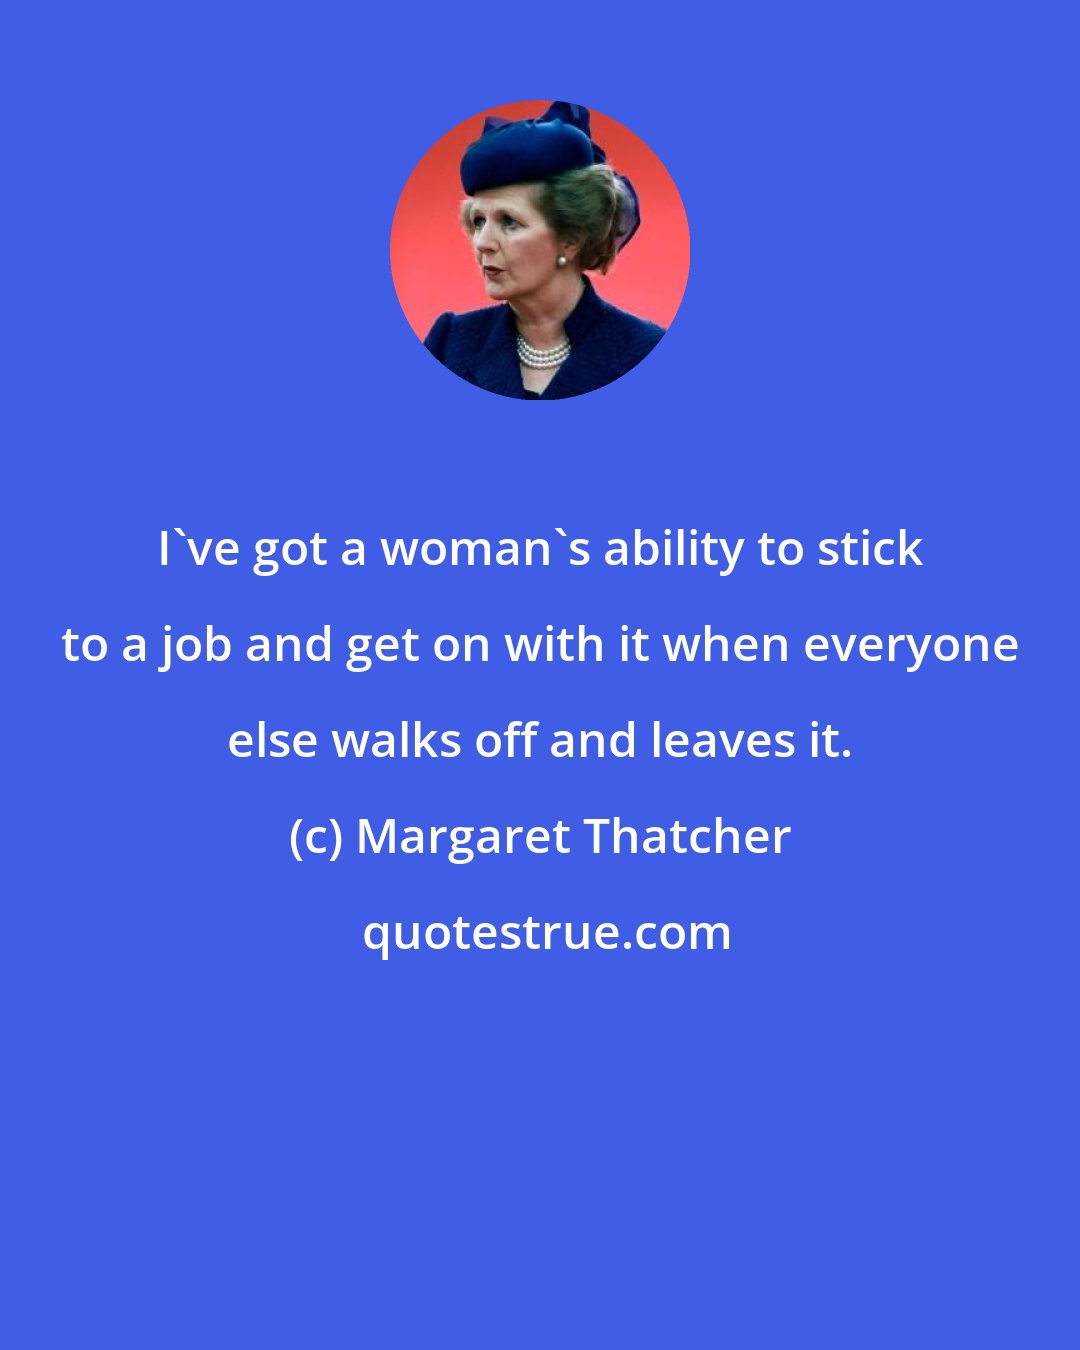 Margaret Thatcher: I've got a woman's ability to stick to a job and get on with it when everyone else walks off and leaves it.